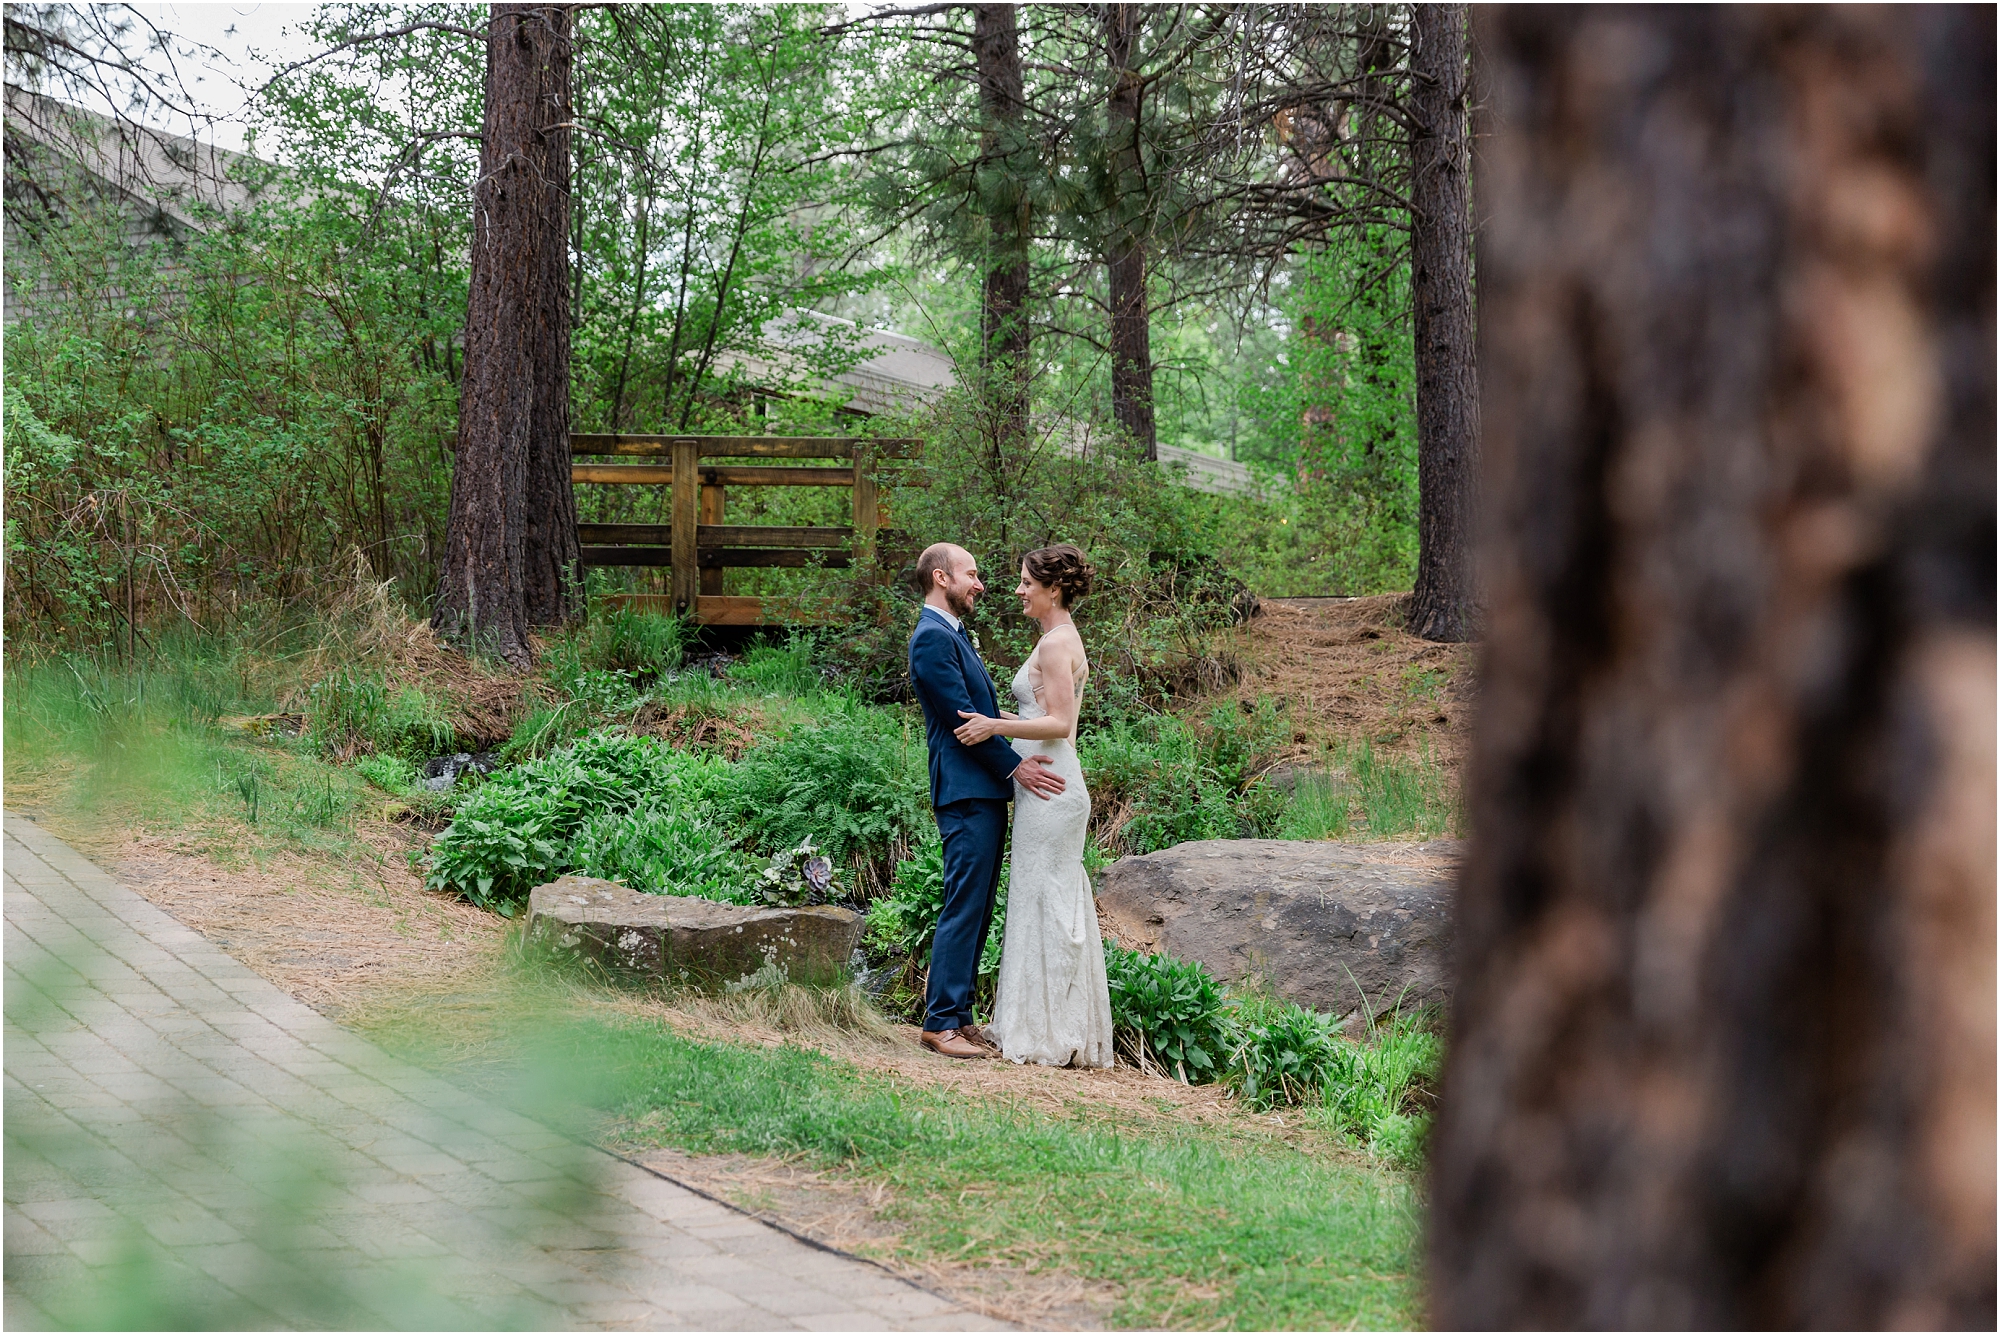 A newly married couple poses together amongst the pines and water feature at the gorgeous High Desert Museum wedding venue in Bend, OR. | Erica Swantek Photography